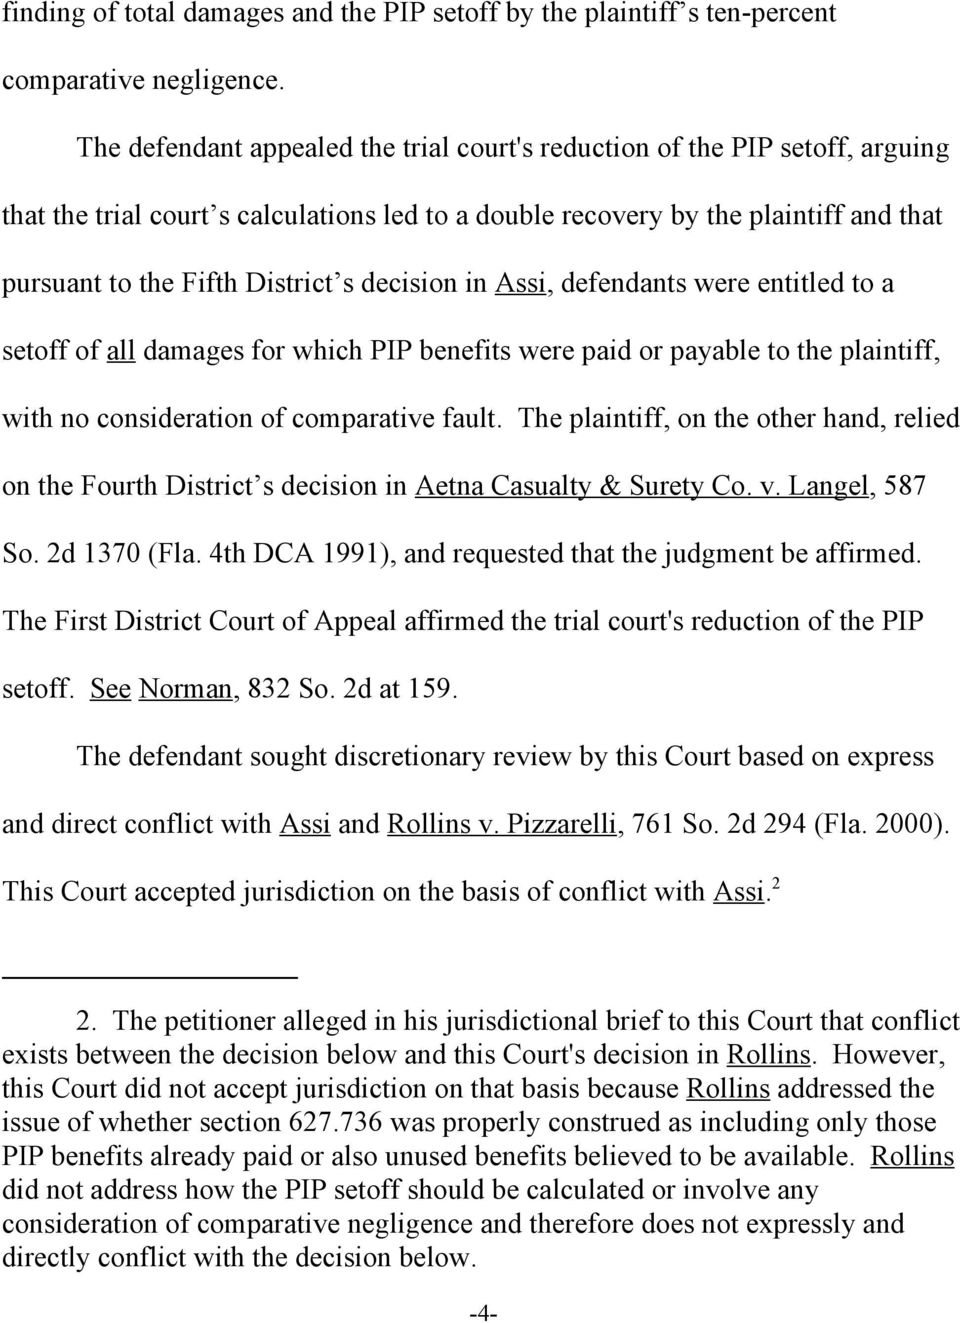 decision in Assi, defendants were entitled to a setoff of all damages for which PIP benefits were paid or payable to the plaintiff, with no consideration of comparative fault.